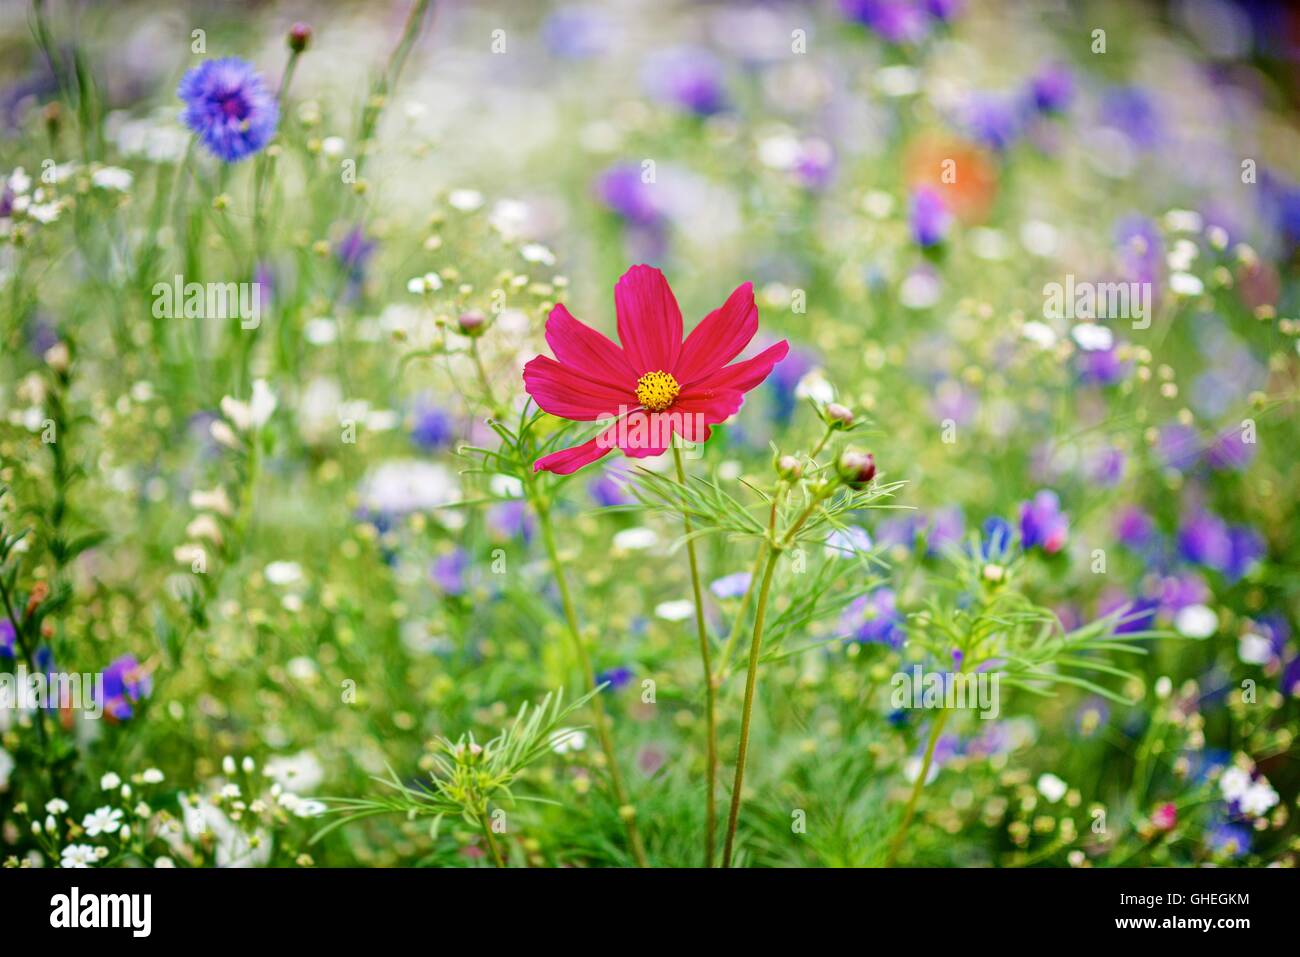 A vivid, sharply rendered red Cosmos flower amongst a blurred background of wild meadow flowers. blue and white. Green foliage Stock Photo